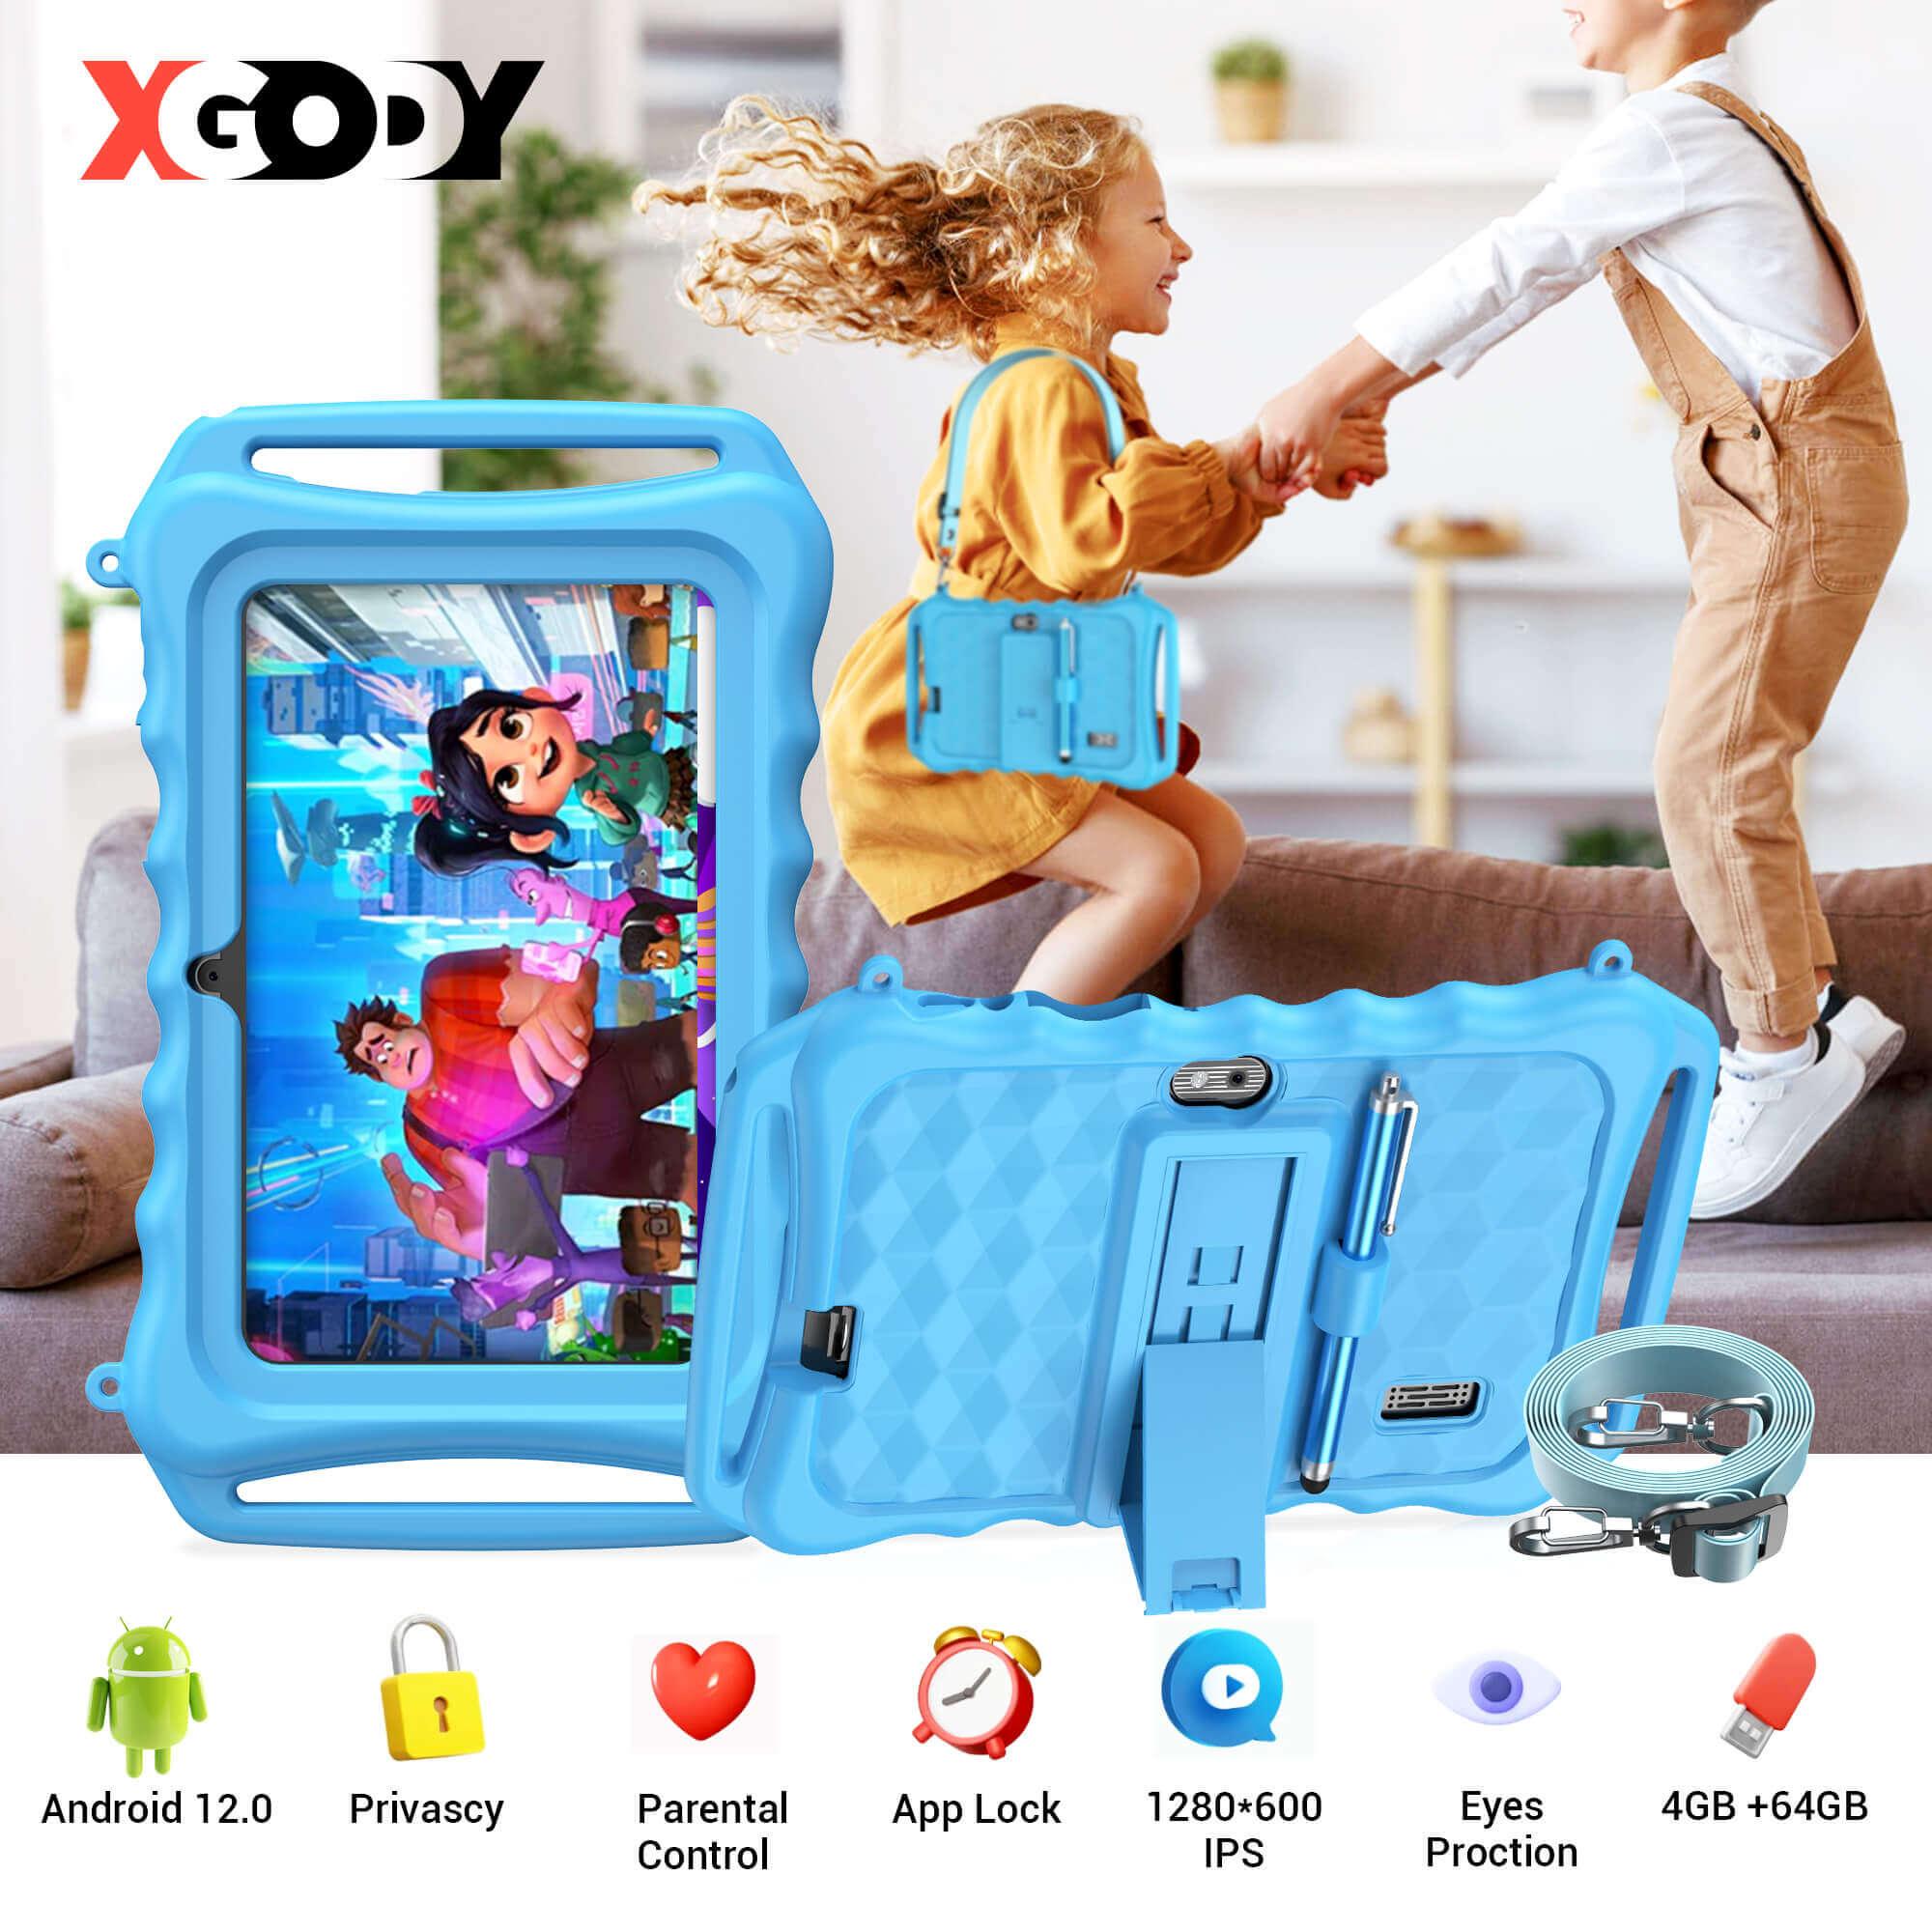 Cost-effective and Most worthwhile T702PRO 7 Inch Tablet With Case For Kids Aged 3-12, 32G With Bluetooth WiFi Module - XGODY 